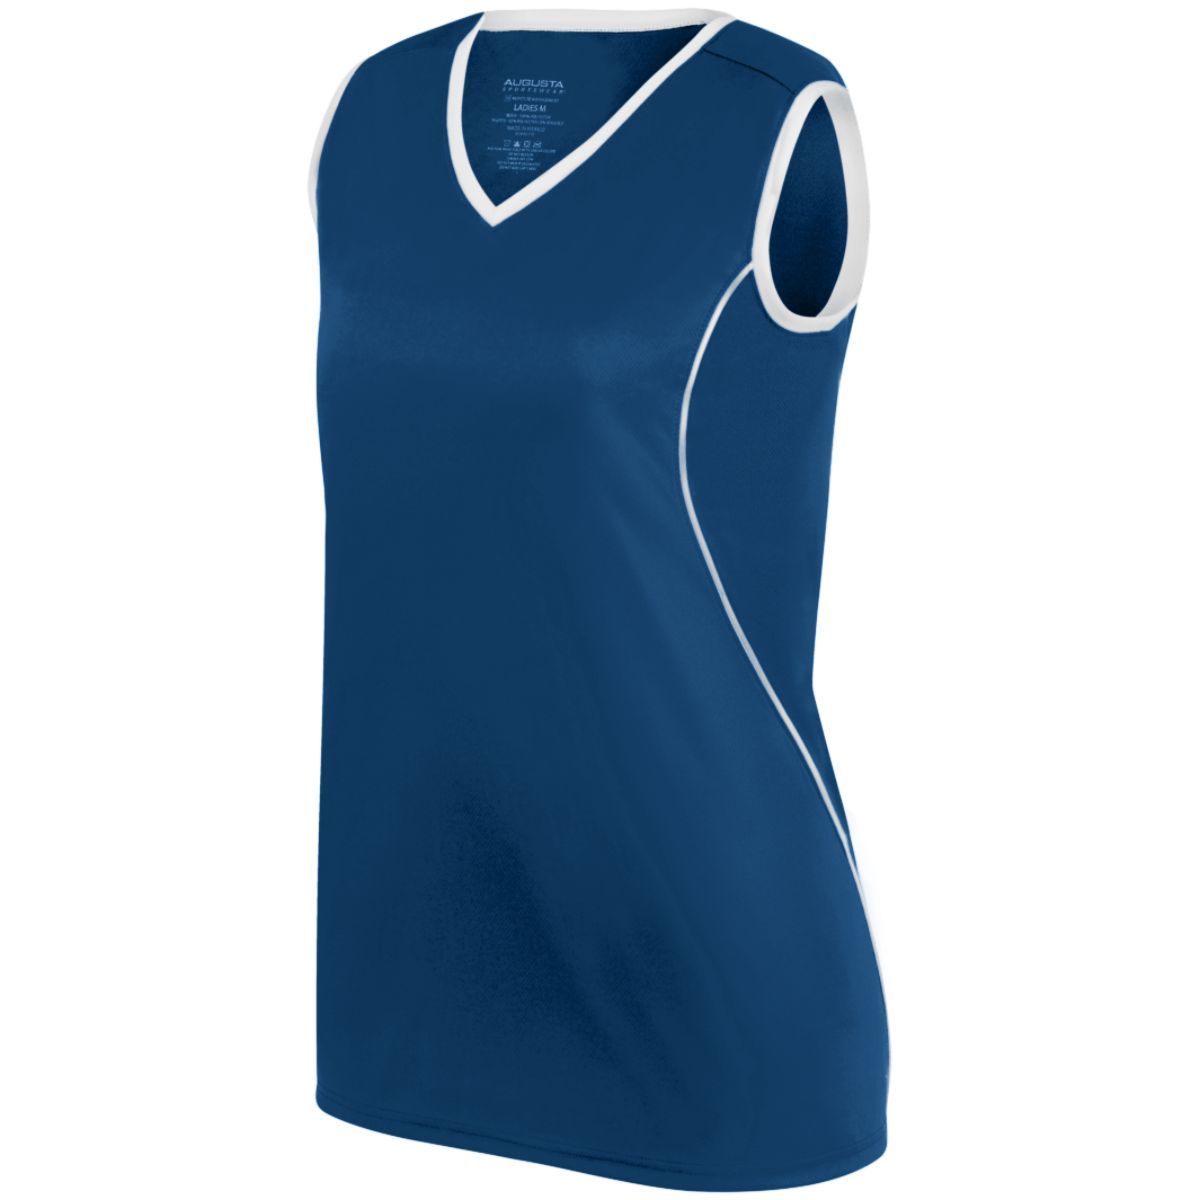 Augusta Sportswear Ladies Firebolt Jersey in Navy/White  -Part of the Ladies, Ladies-Jersey, Augusta-Products, Softball, Shirts product lines at KanaleyCreations.com